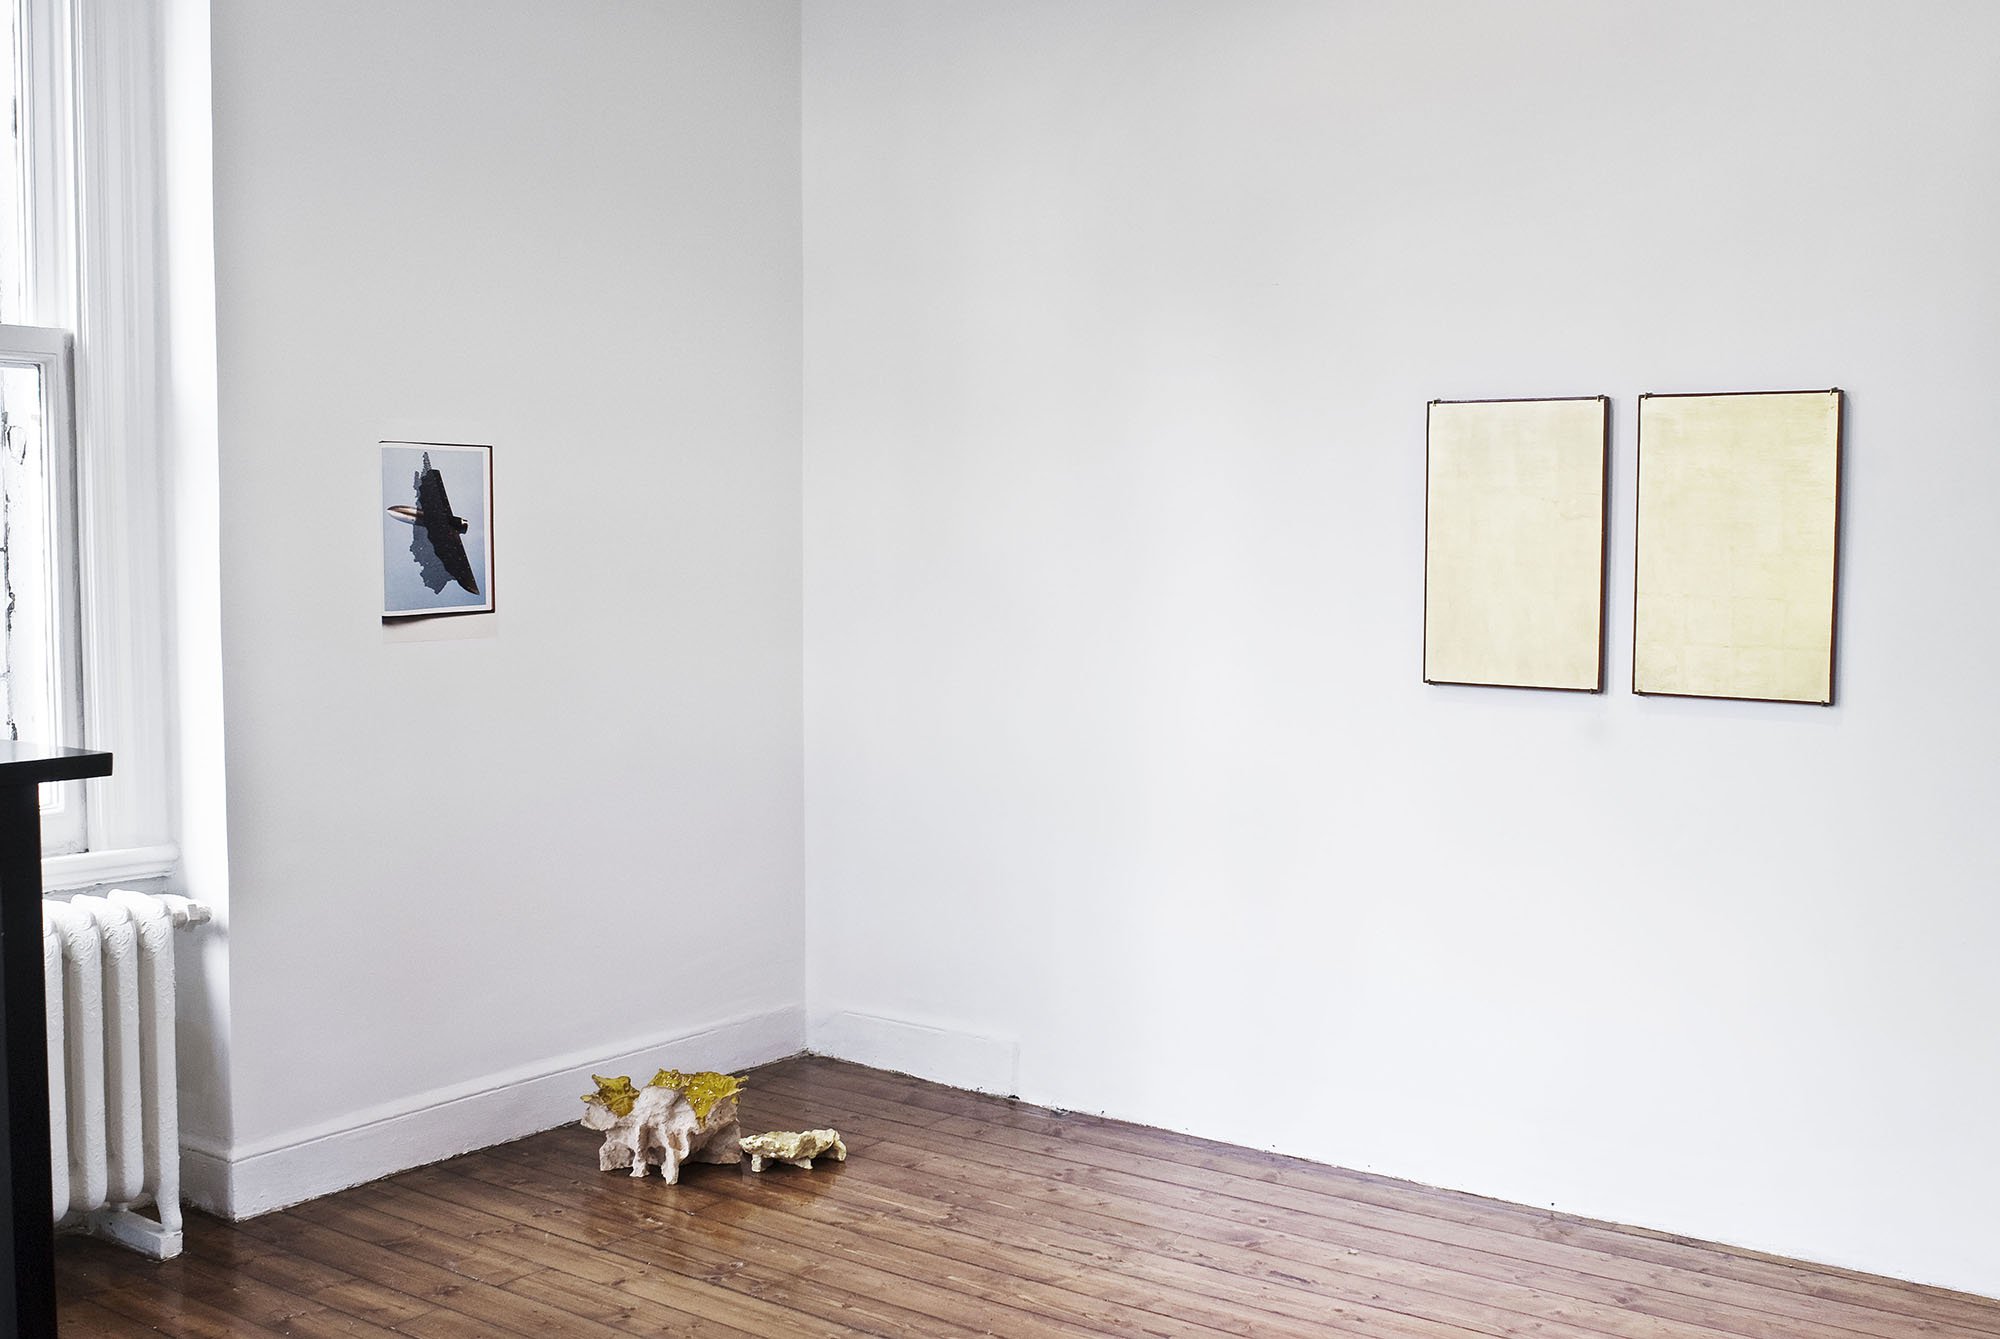 Installation view, All That Shines Ain’t No Gold, Rodeo, Istanbul, 2012